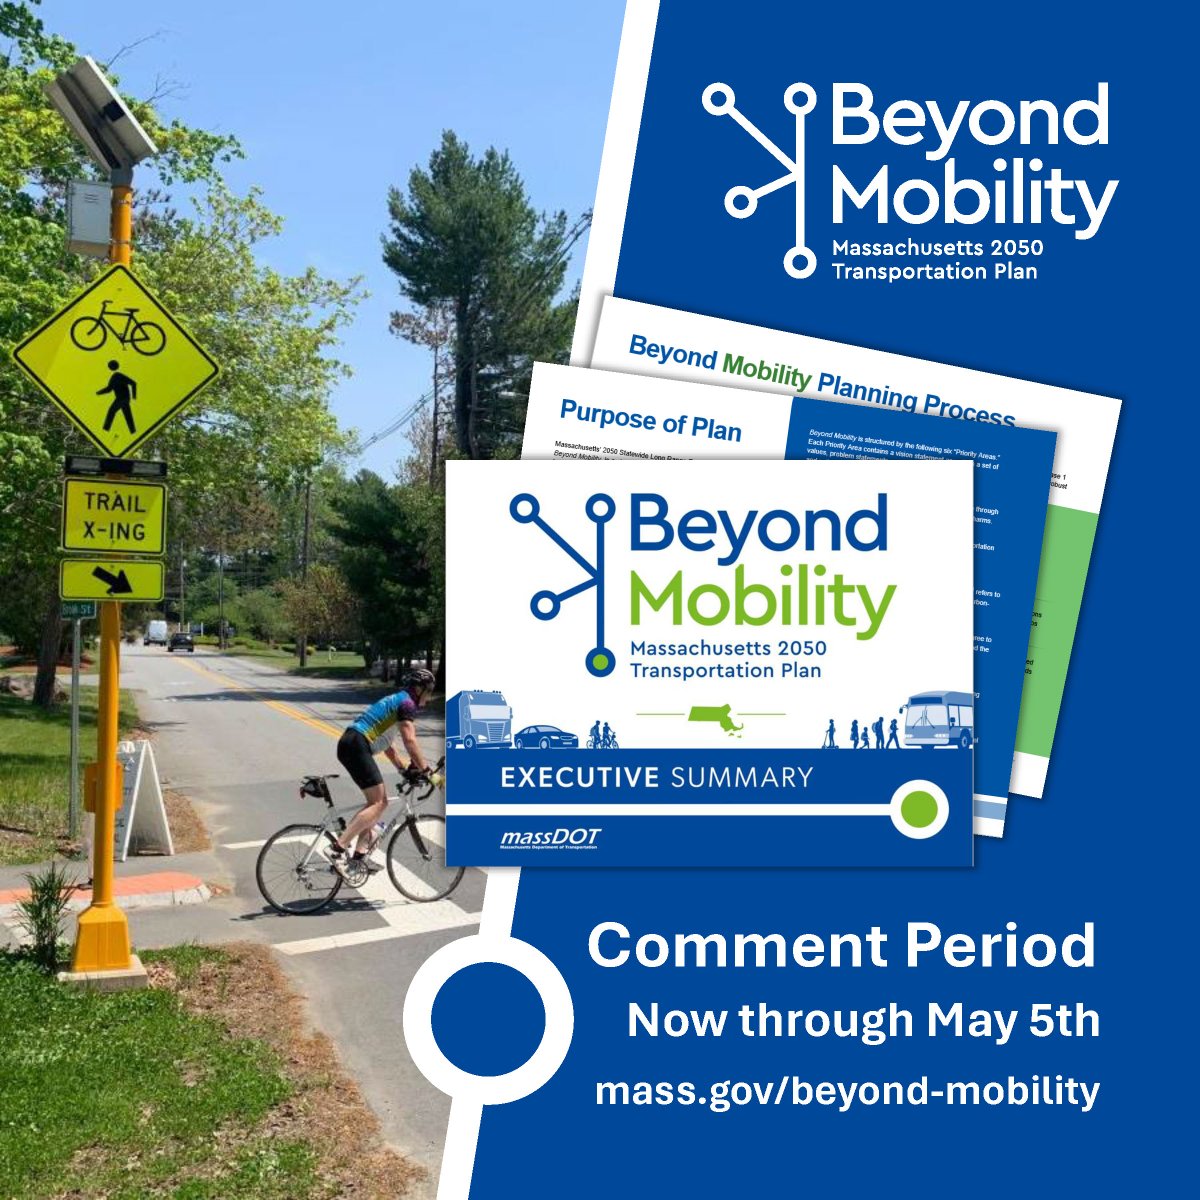 Outreach for Beyond Mobility showed rural residents feel there is a lack of transportation options with incomplete bike/pedestrian networks. The Plan has action items that call for investments to close these gaps. Learn more and comment through 5/5, at mass.gov/beyond-mobility